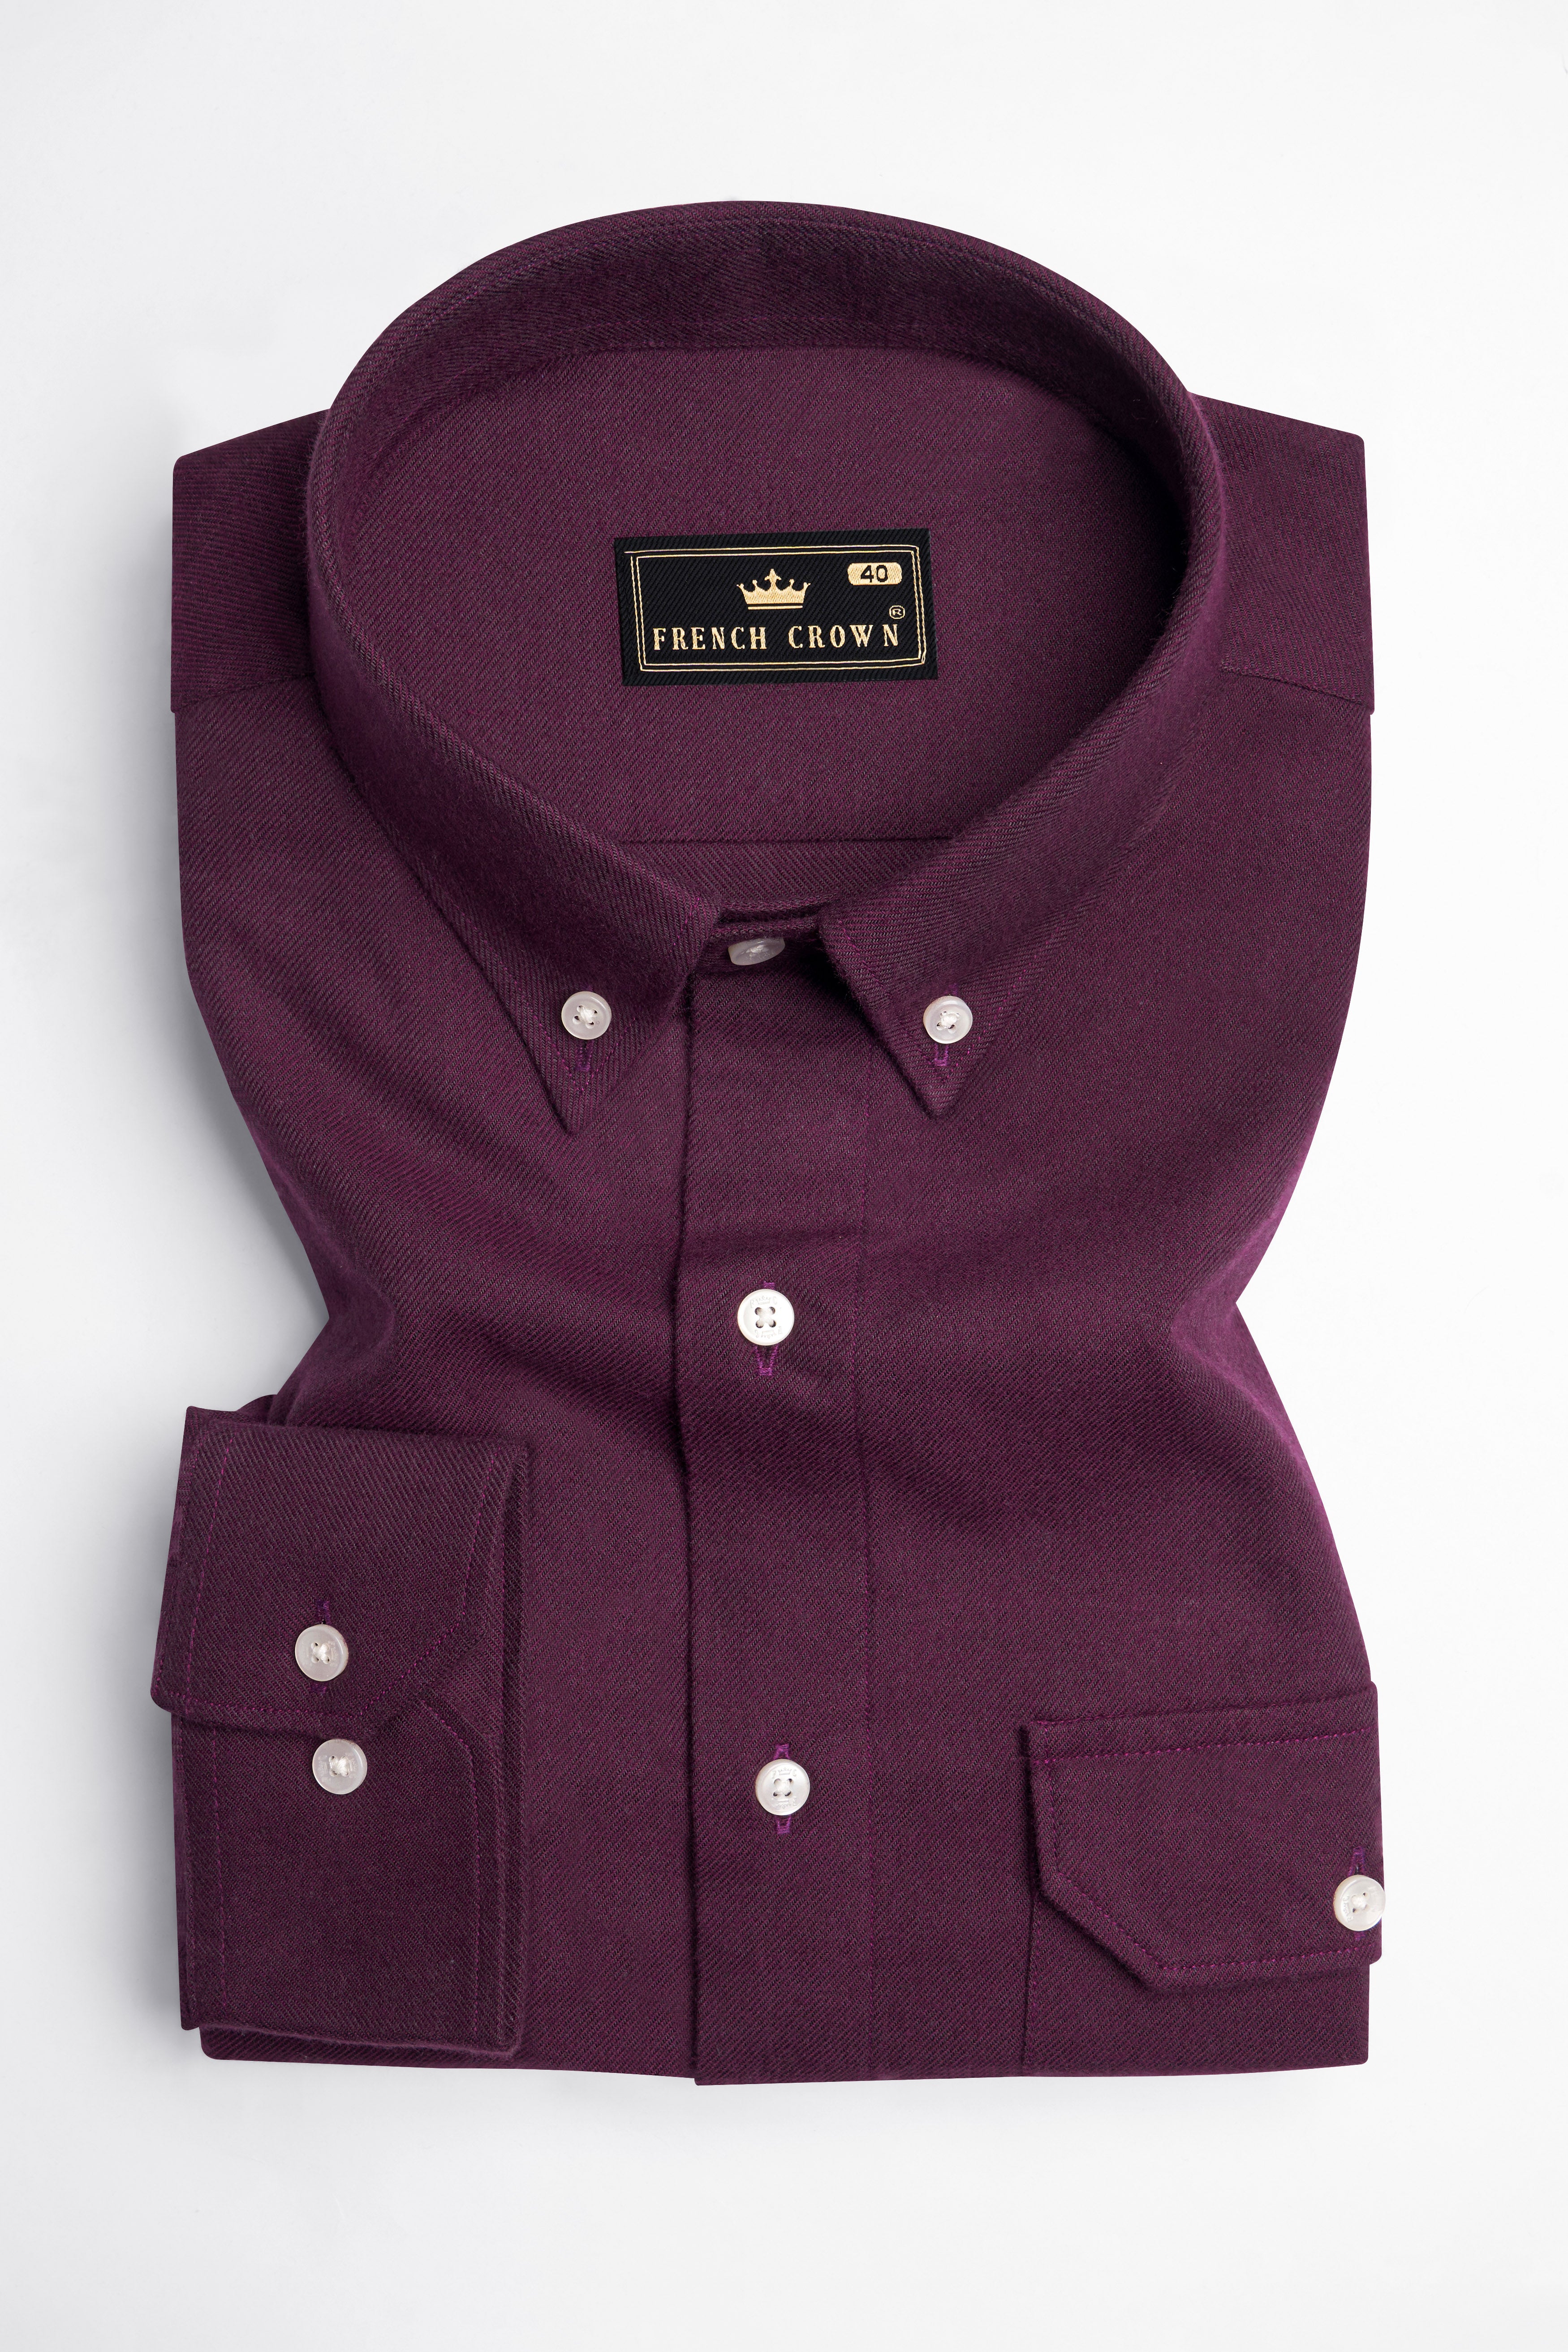 Wine Berry Flannel Button Down Overshirt